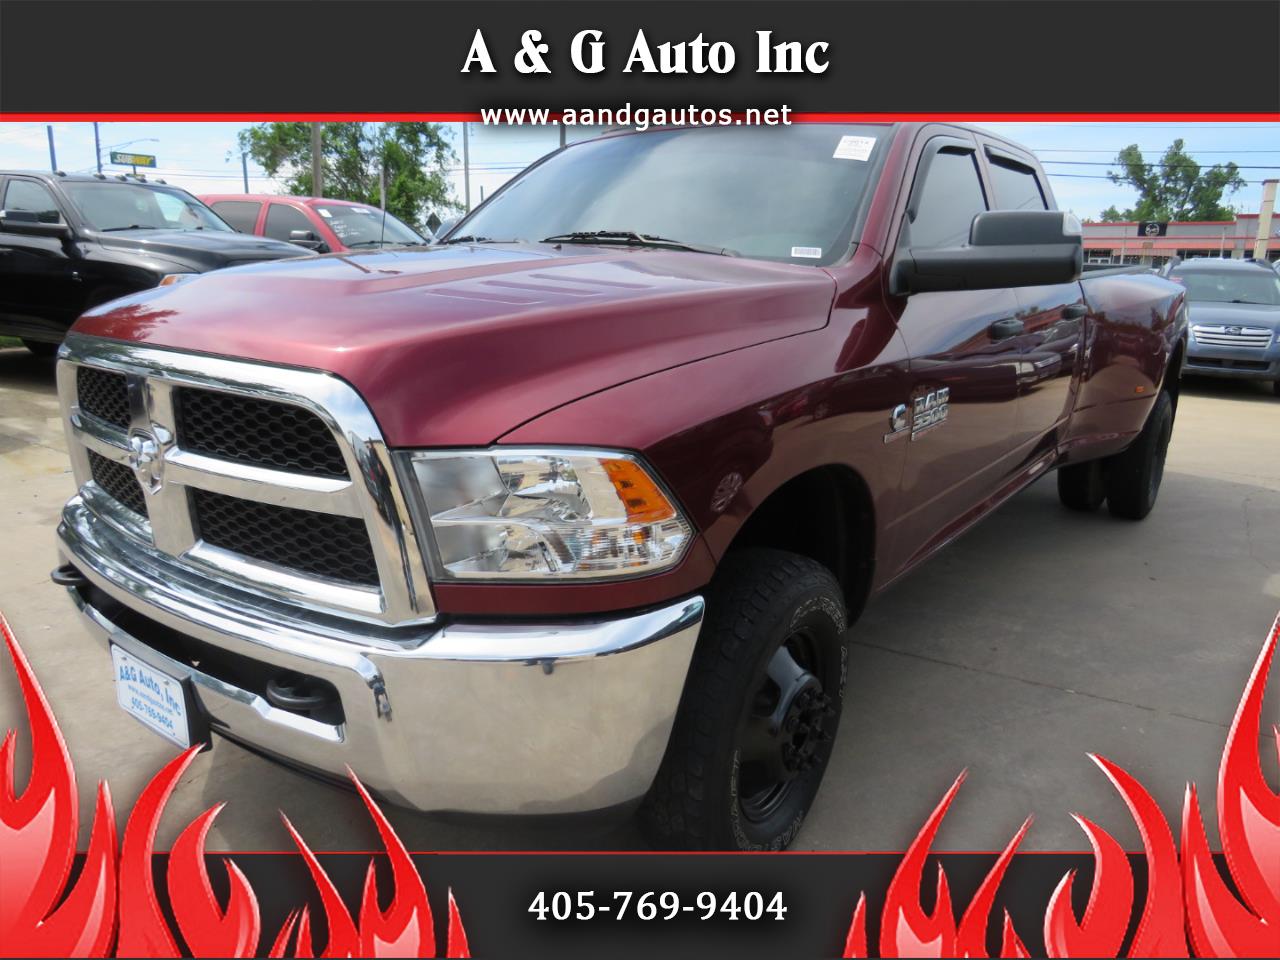 2018 Dodge Ram 3500 for sale in Oklahoma City OK 73141 by A & G Auto Inc